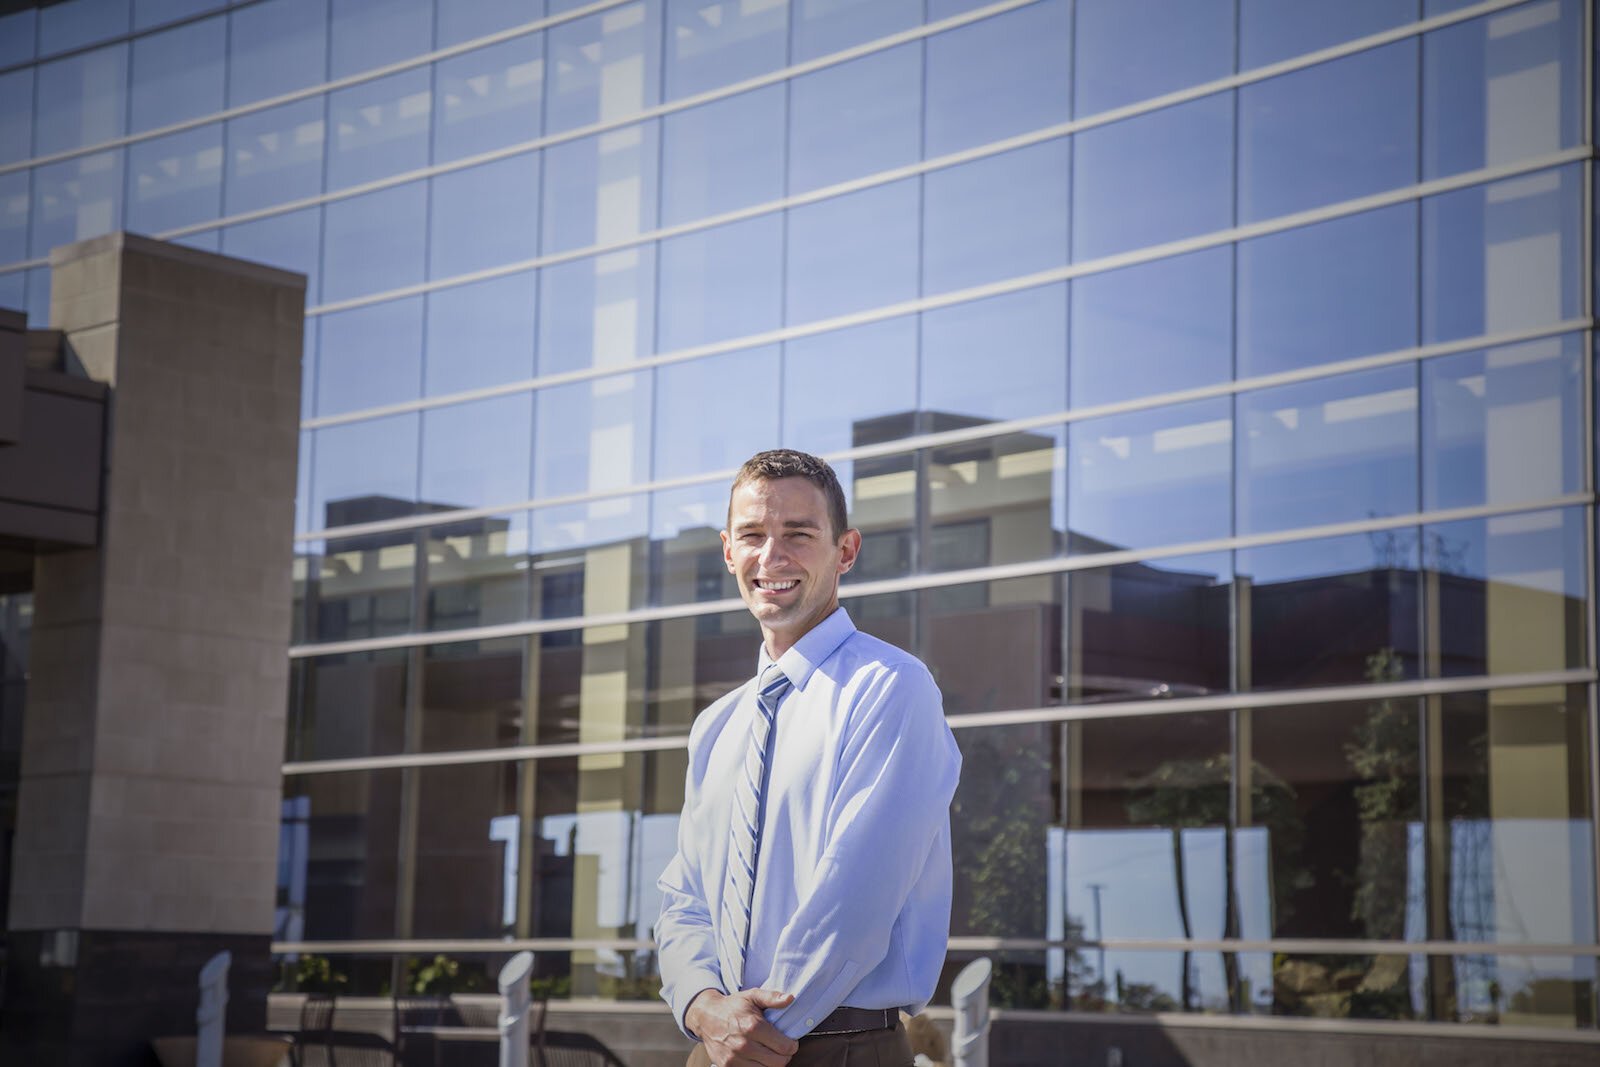 A 2006 graduate of Carroll High School, Tyler Atkins, M.D., returned to Fort Wayne to work for Parkview Health.